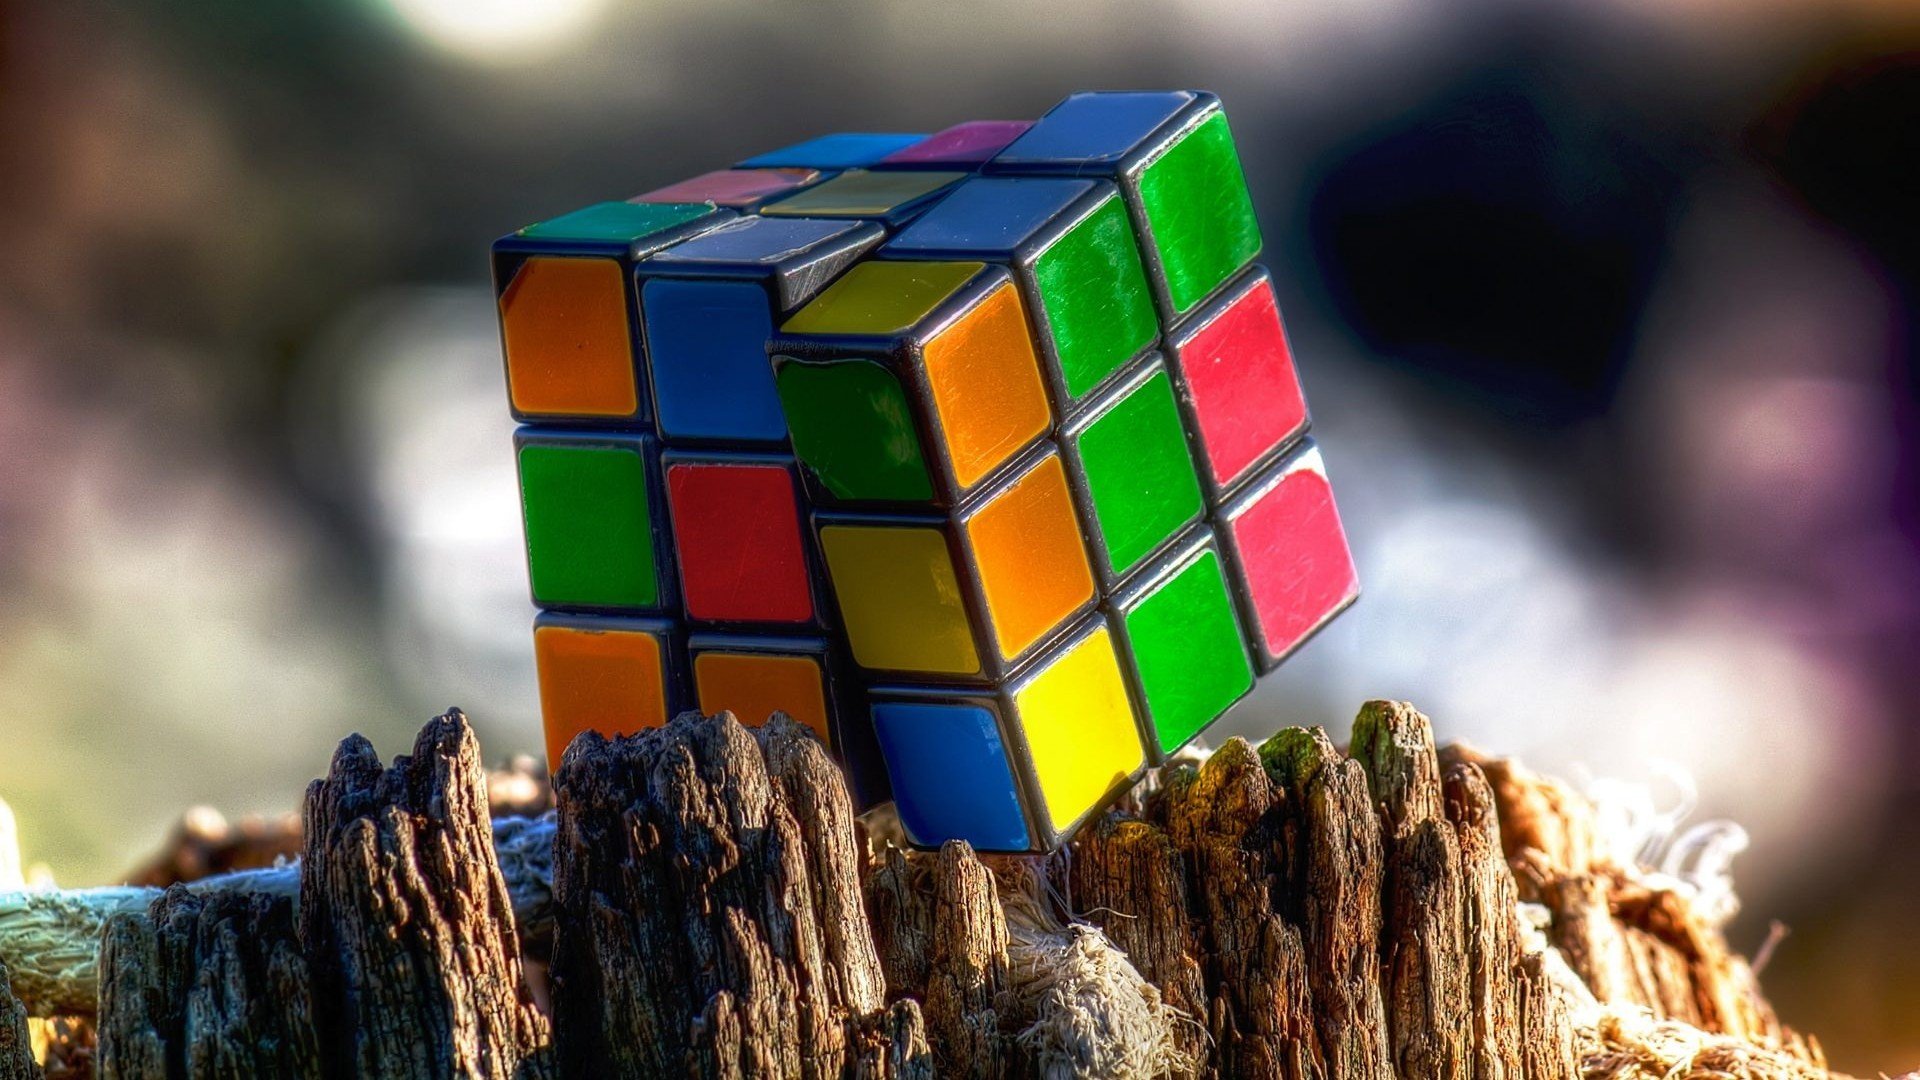 Rubiks Cube, Colorful, Toys Wallpapers HD / Desktop and Mobile Backgrounds